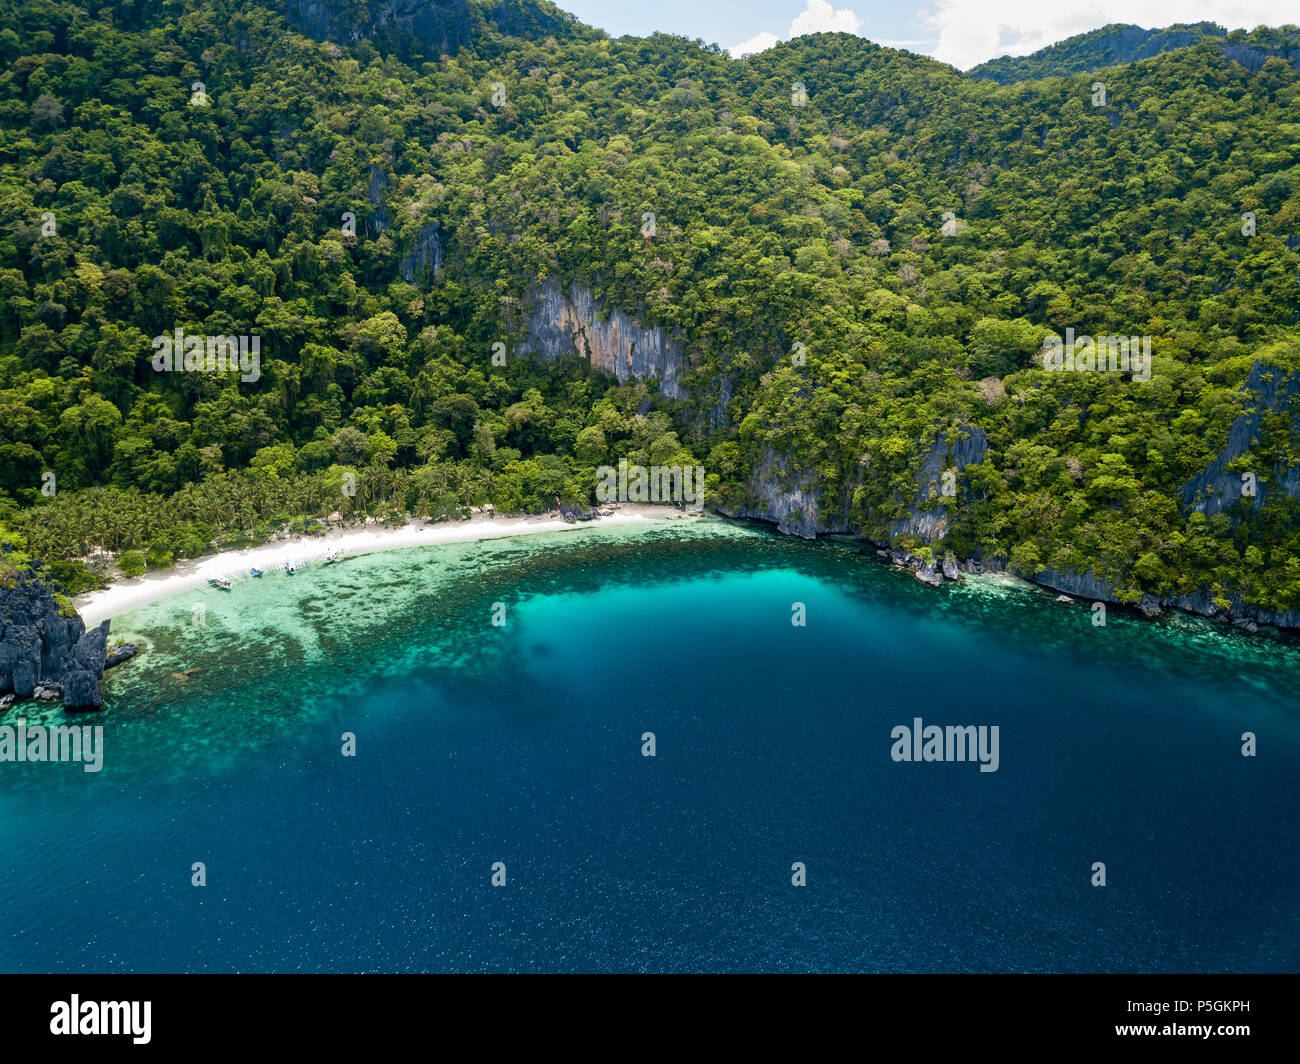 Aerial drone view of a spectacular tropical beach surrounded by dense jungle and jagged cliffs (Papaya Beach, Palawan) Stock Photo